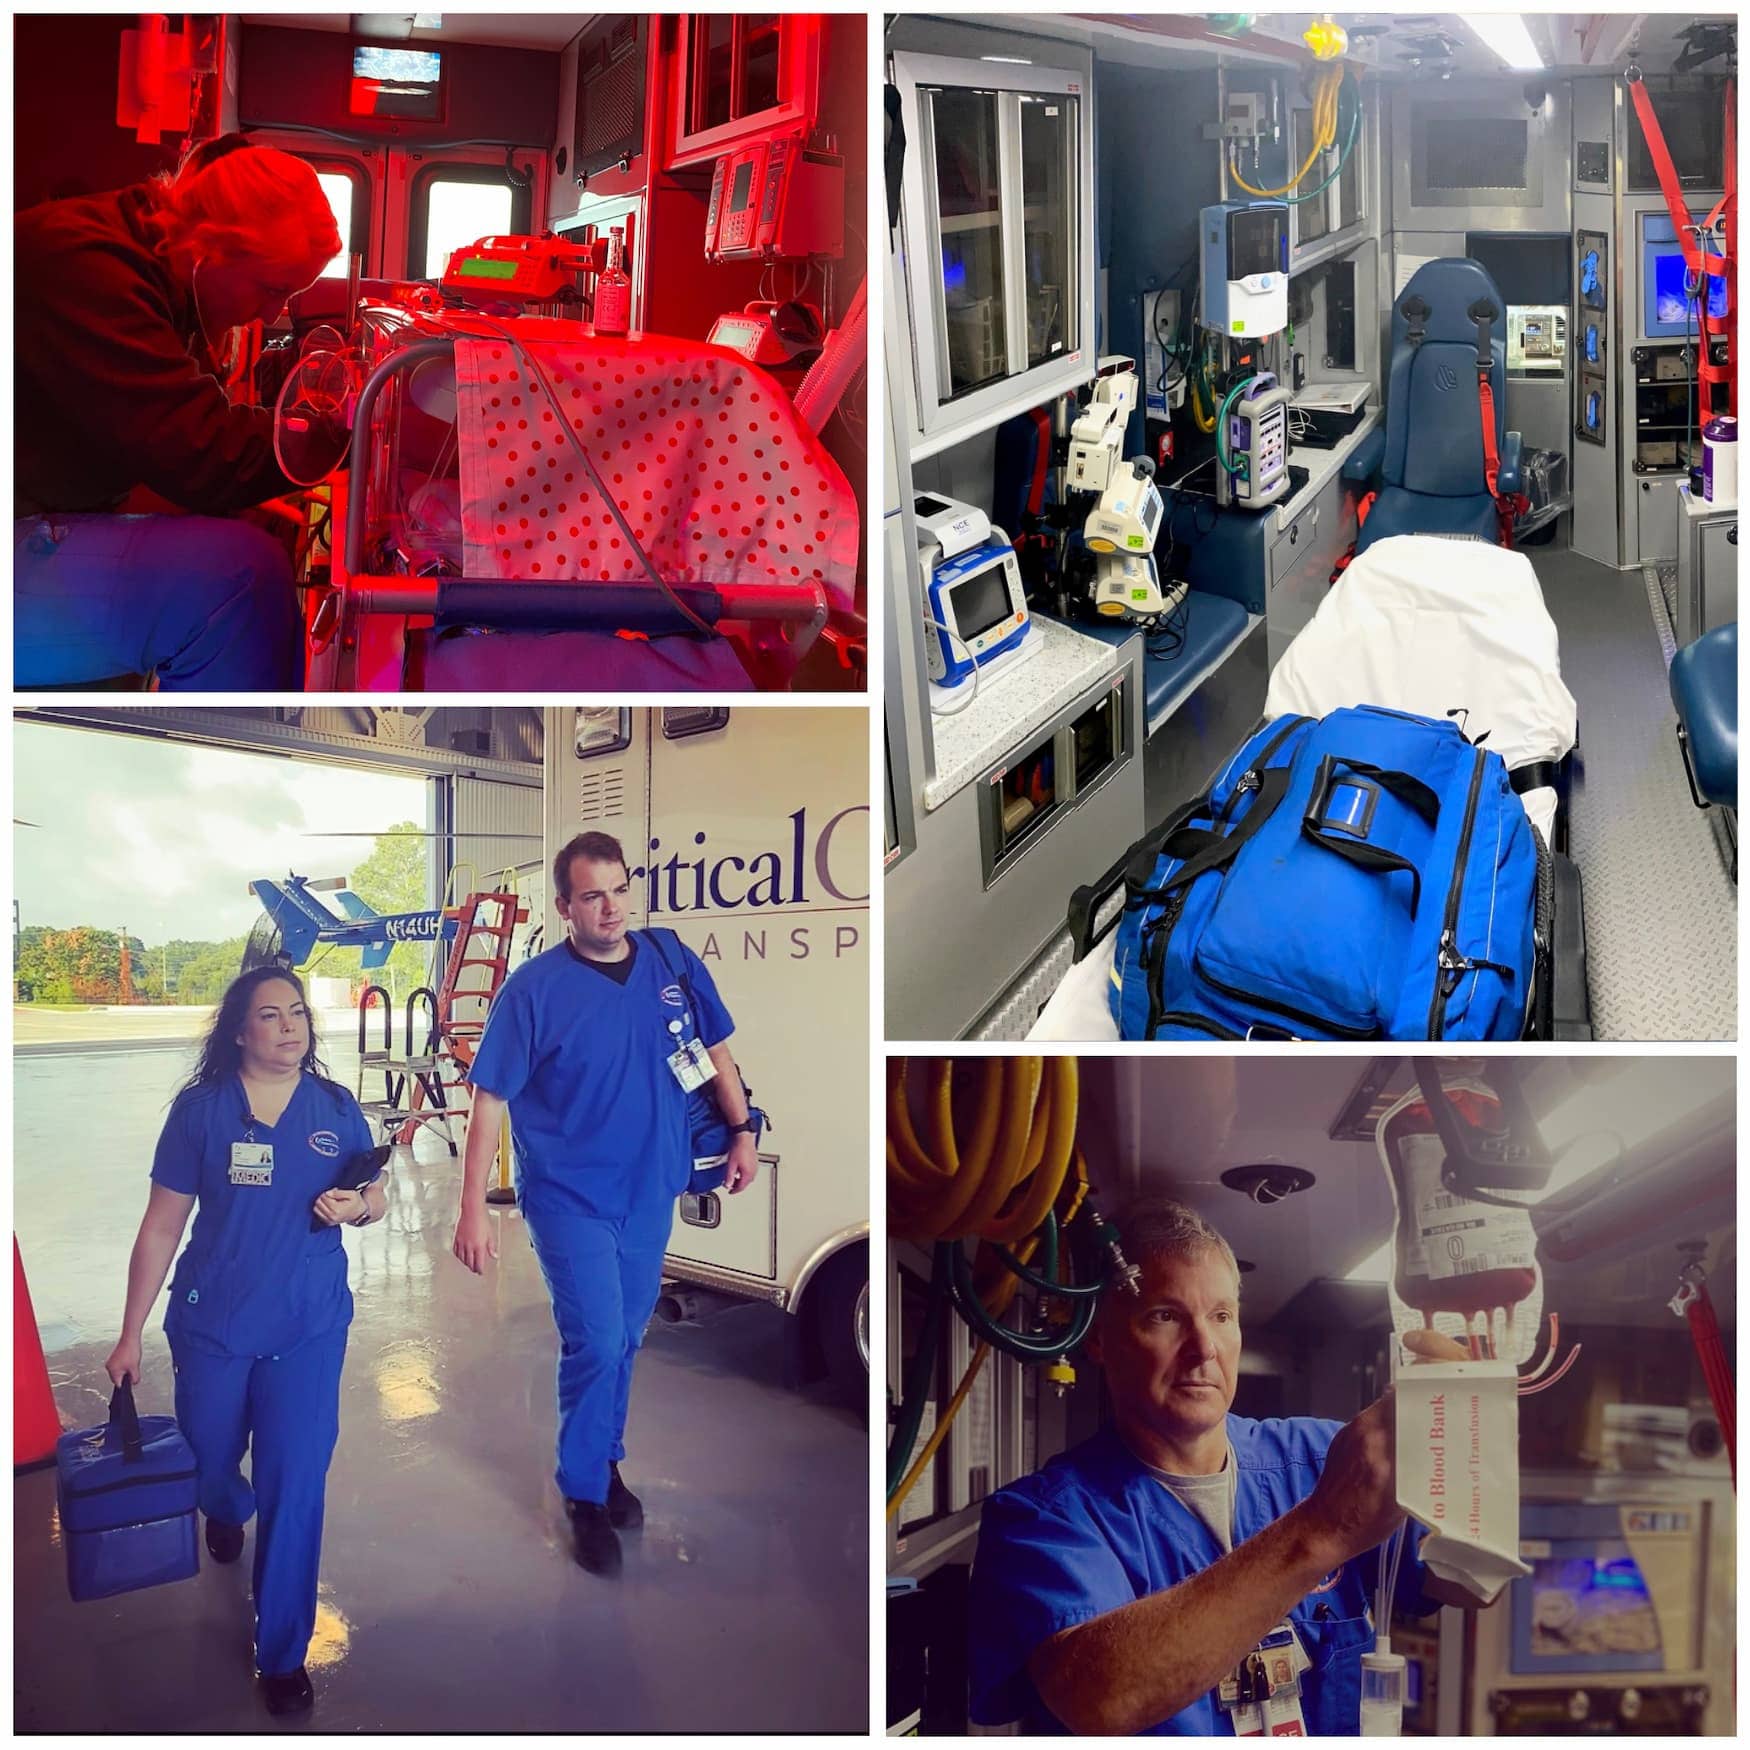 Collage of images of Pediatric Transport Services staff at work.